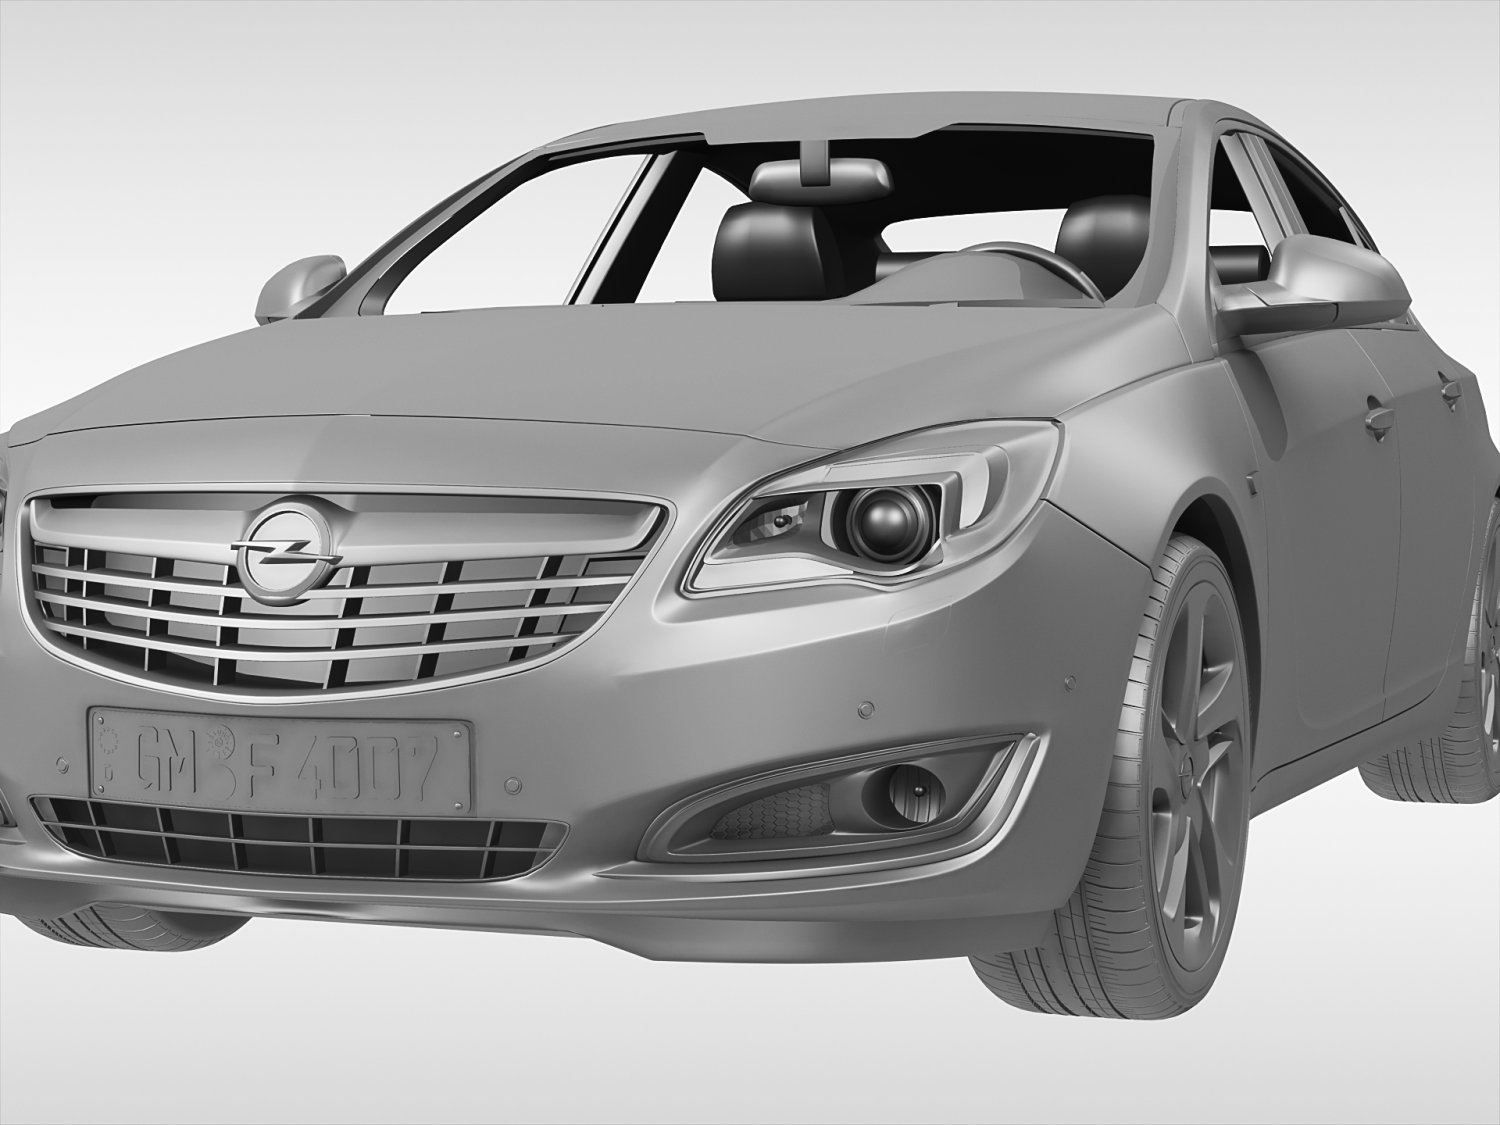 574 Opel Insignia Images, Stock Photos, 3D objects, & Vectors